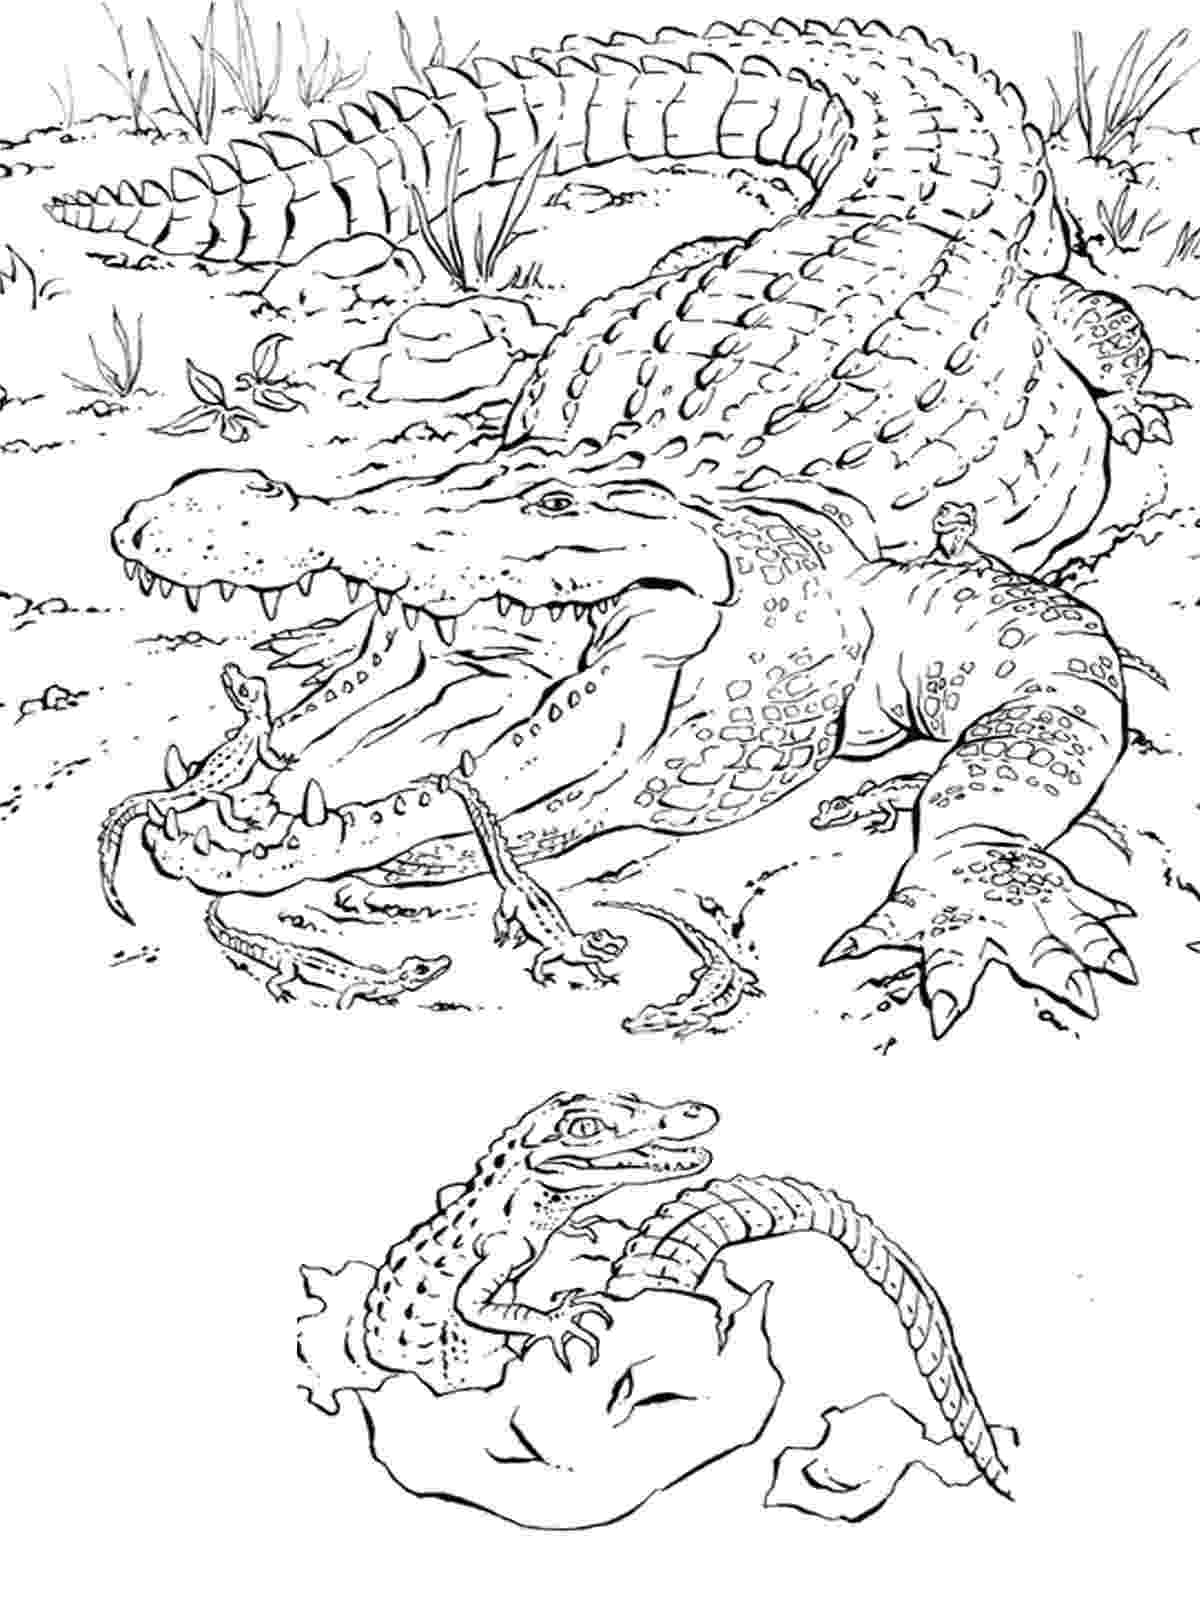 realistic animal coloring pages for adults realistic alligator coloring pages realistic coloring pages adults coloring animal pages for realistic 